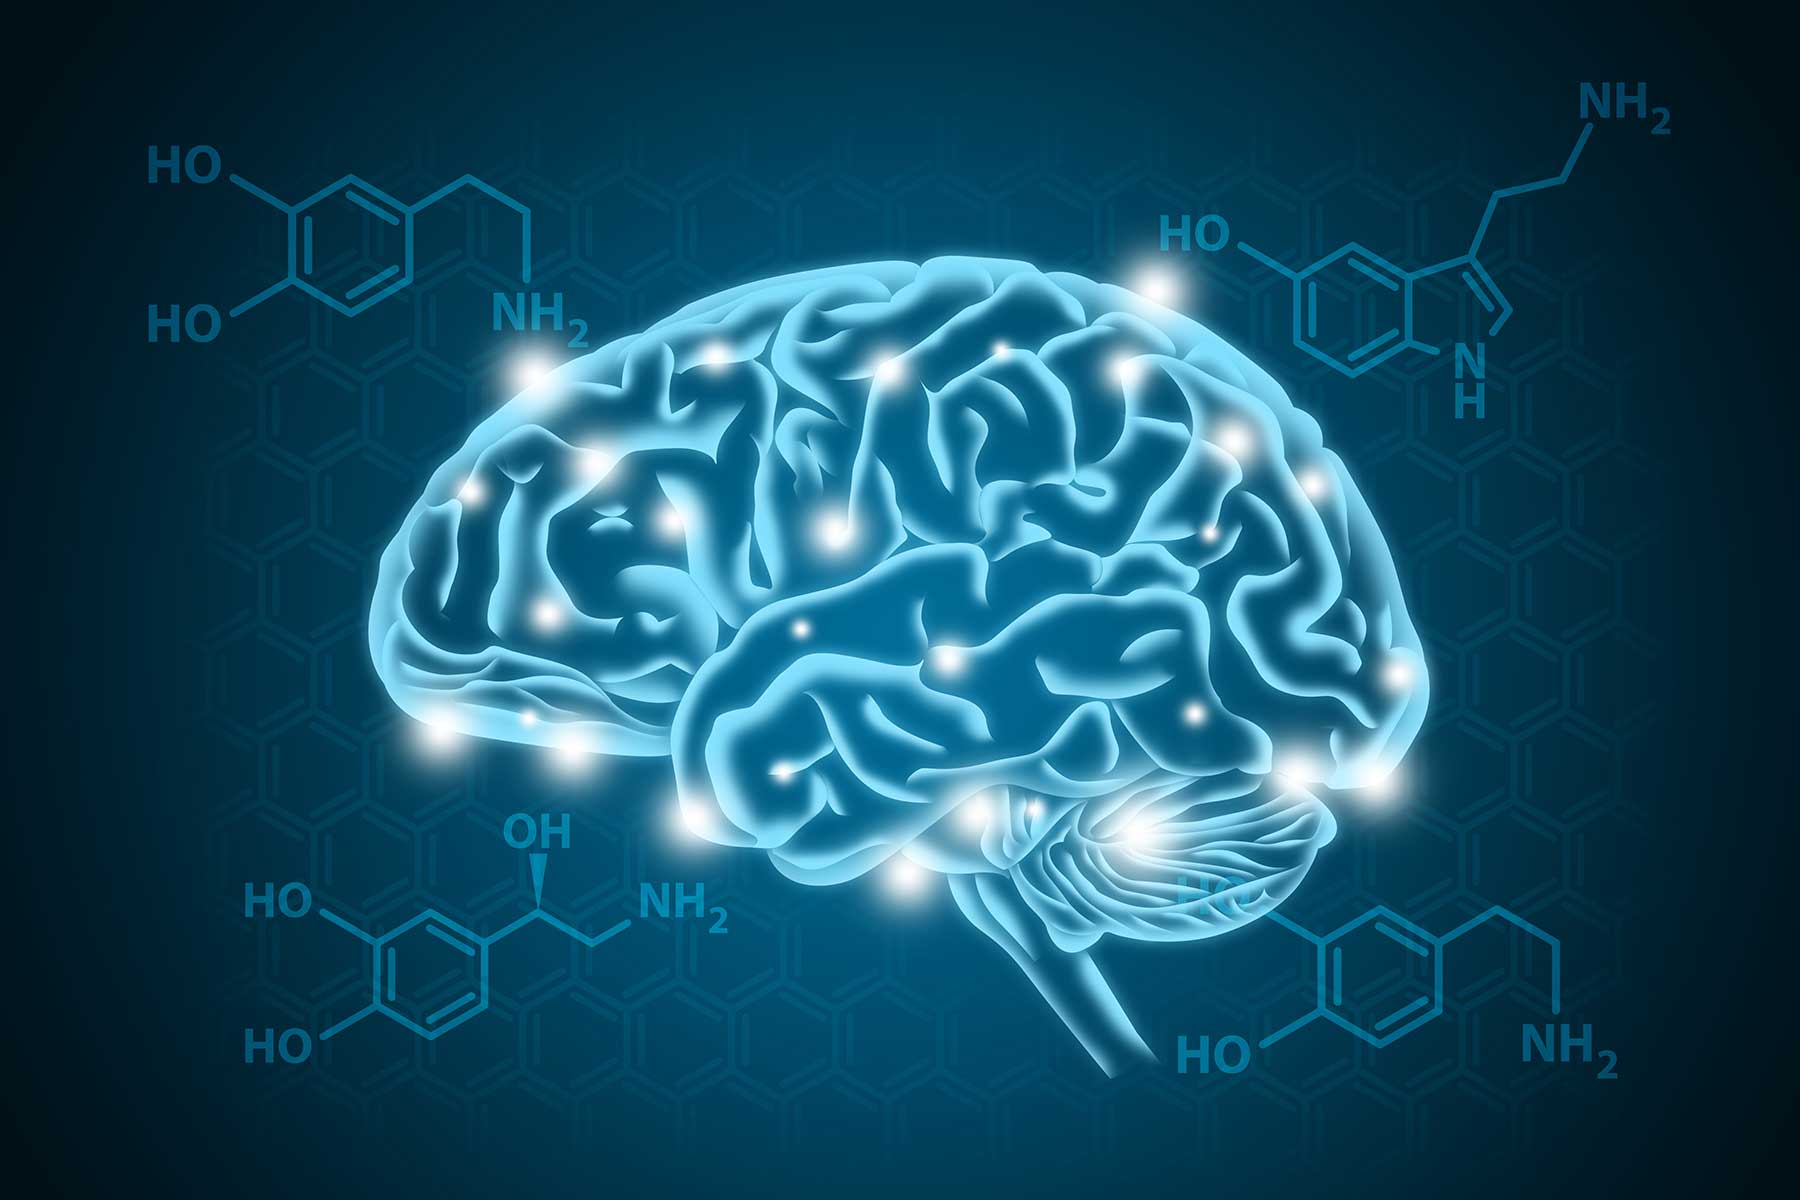 What Is Dopamine In The Brain